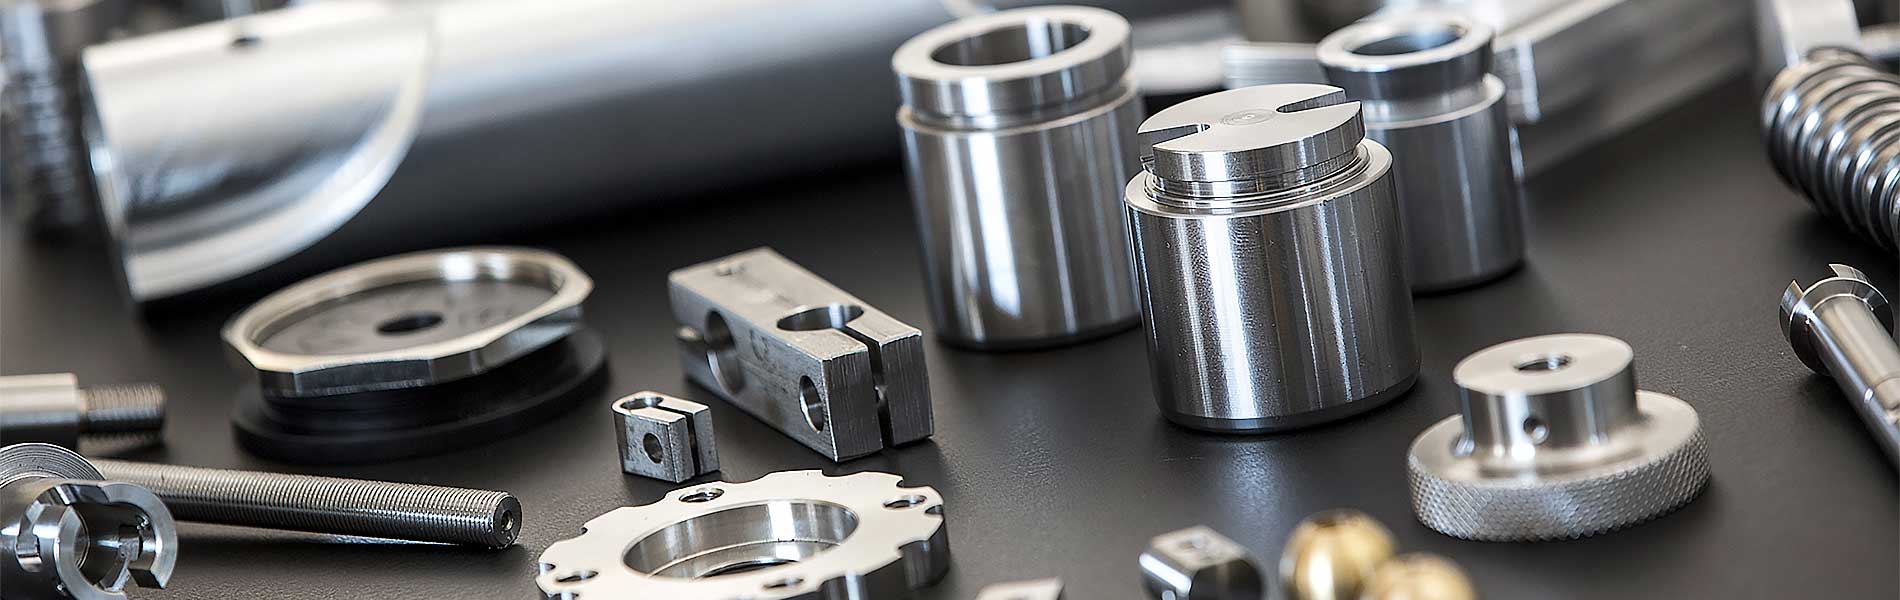 CNC machining in stainless steel - Spaantec